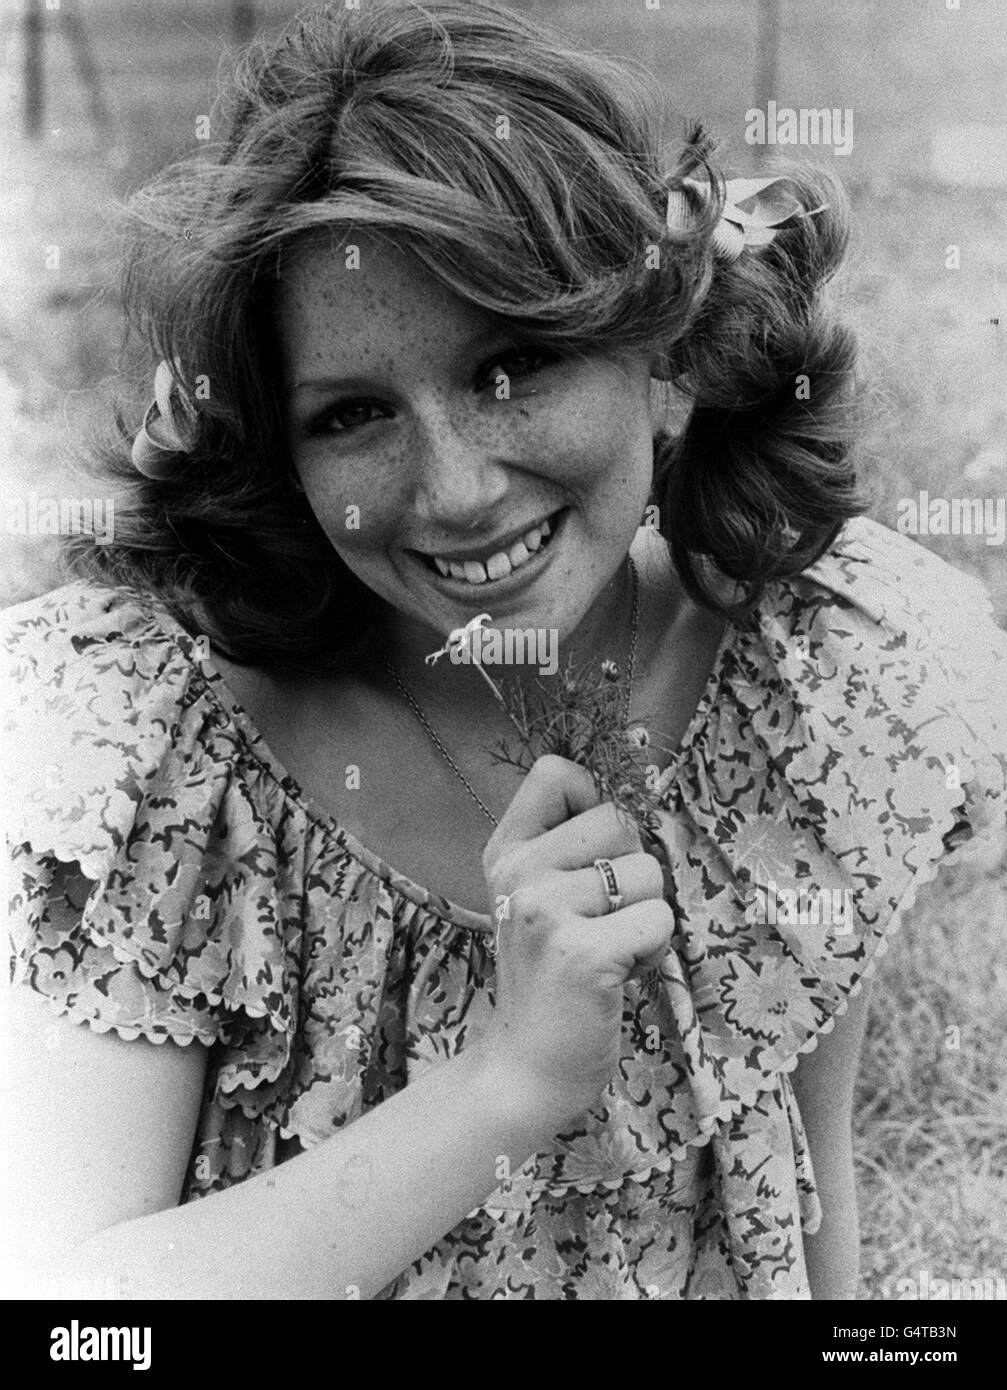 A library file picture of singer Lena Zavaroni. * 7/11/1982 : Lena Zavaroni is admitted to the London psychiatric All Saints Hospital in Kennington as a patient. *2/10/1999 : Lena Zavaroni dies from an infection following an operation. Miss Zavaroni had suffered from aneroixia nervosa for many years. Stock Photo